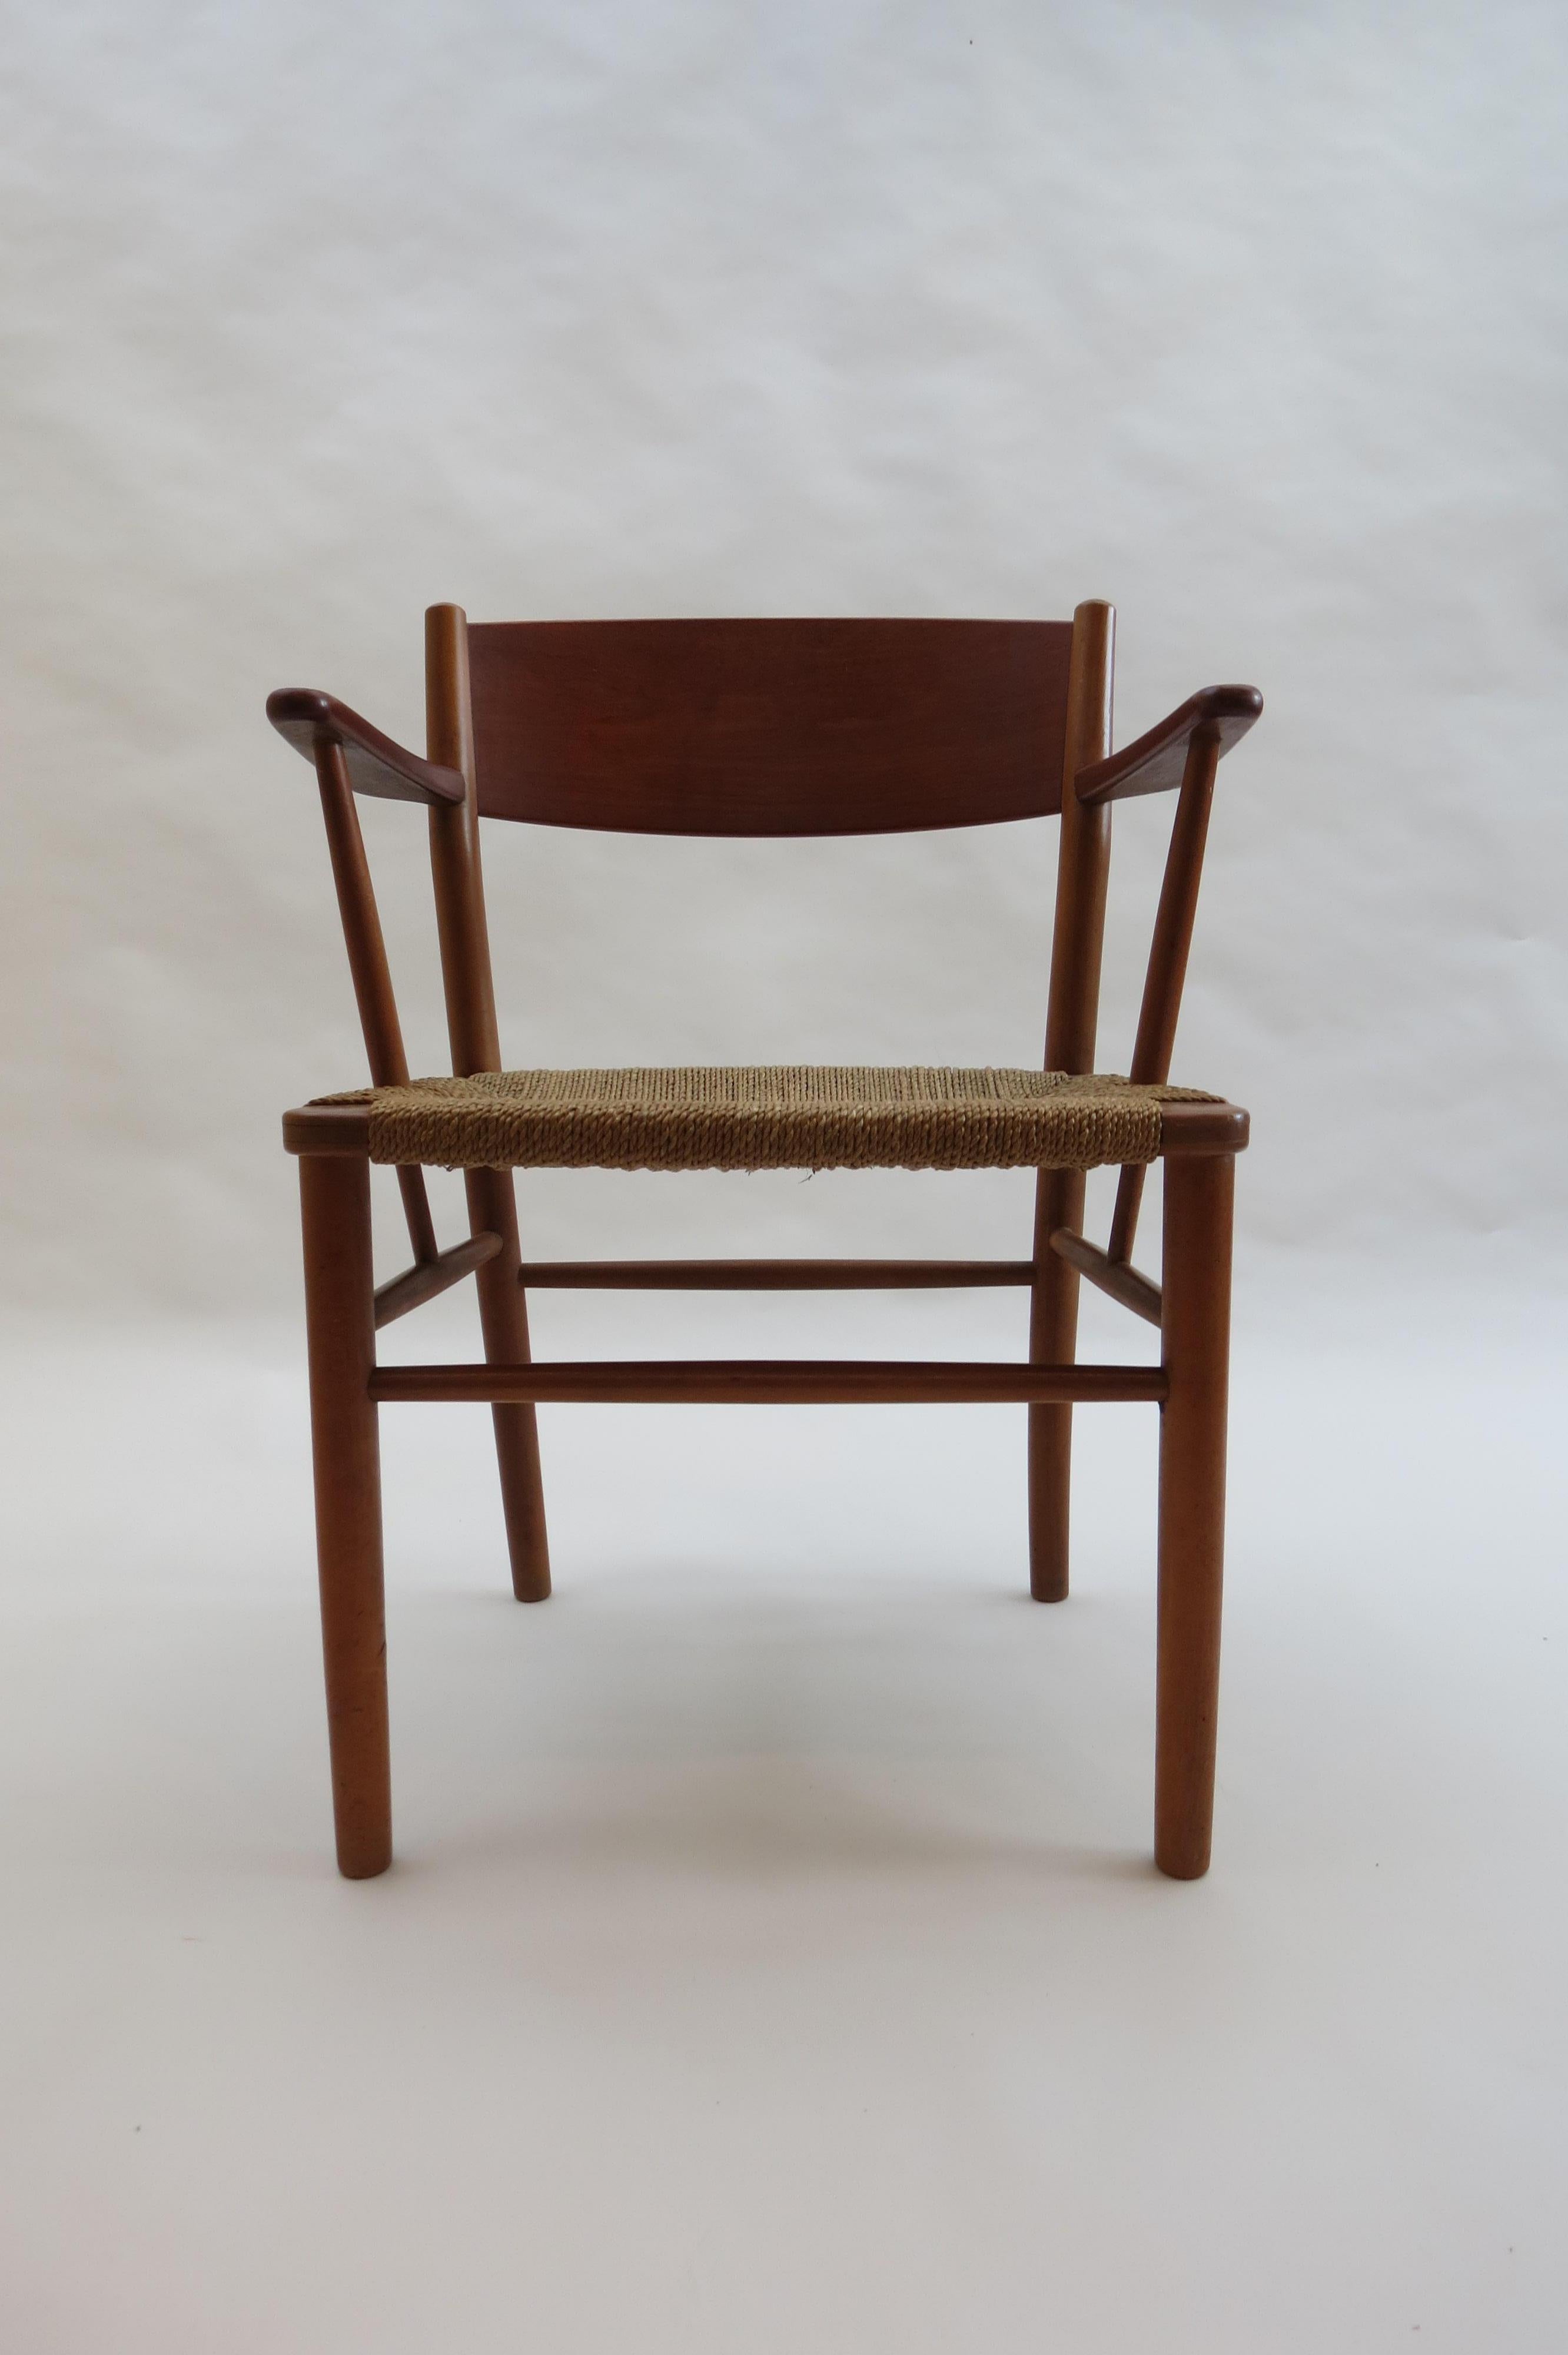 Danish chair designed by Borge Mogensen and manufactured by Soborg Mobler, Denmark. Model No 156.

Dates from the 1950s. In very good condition, retains the original finish and cord seat. Lovely detail on the top of the front legs.

Made from